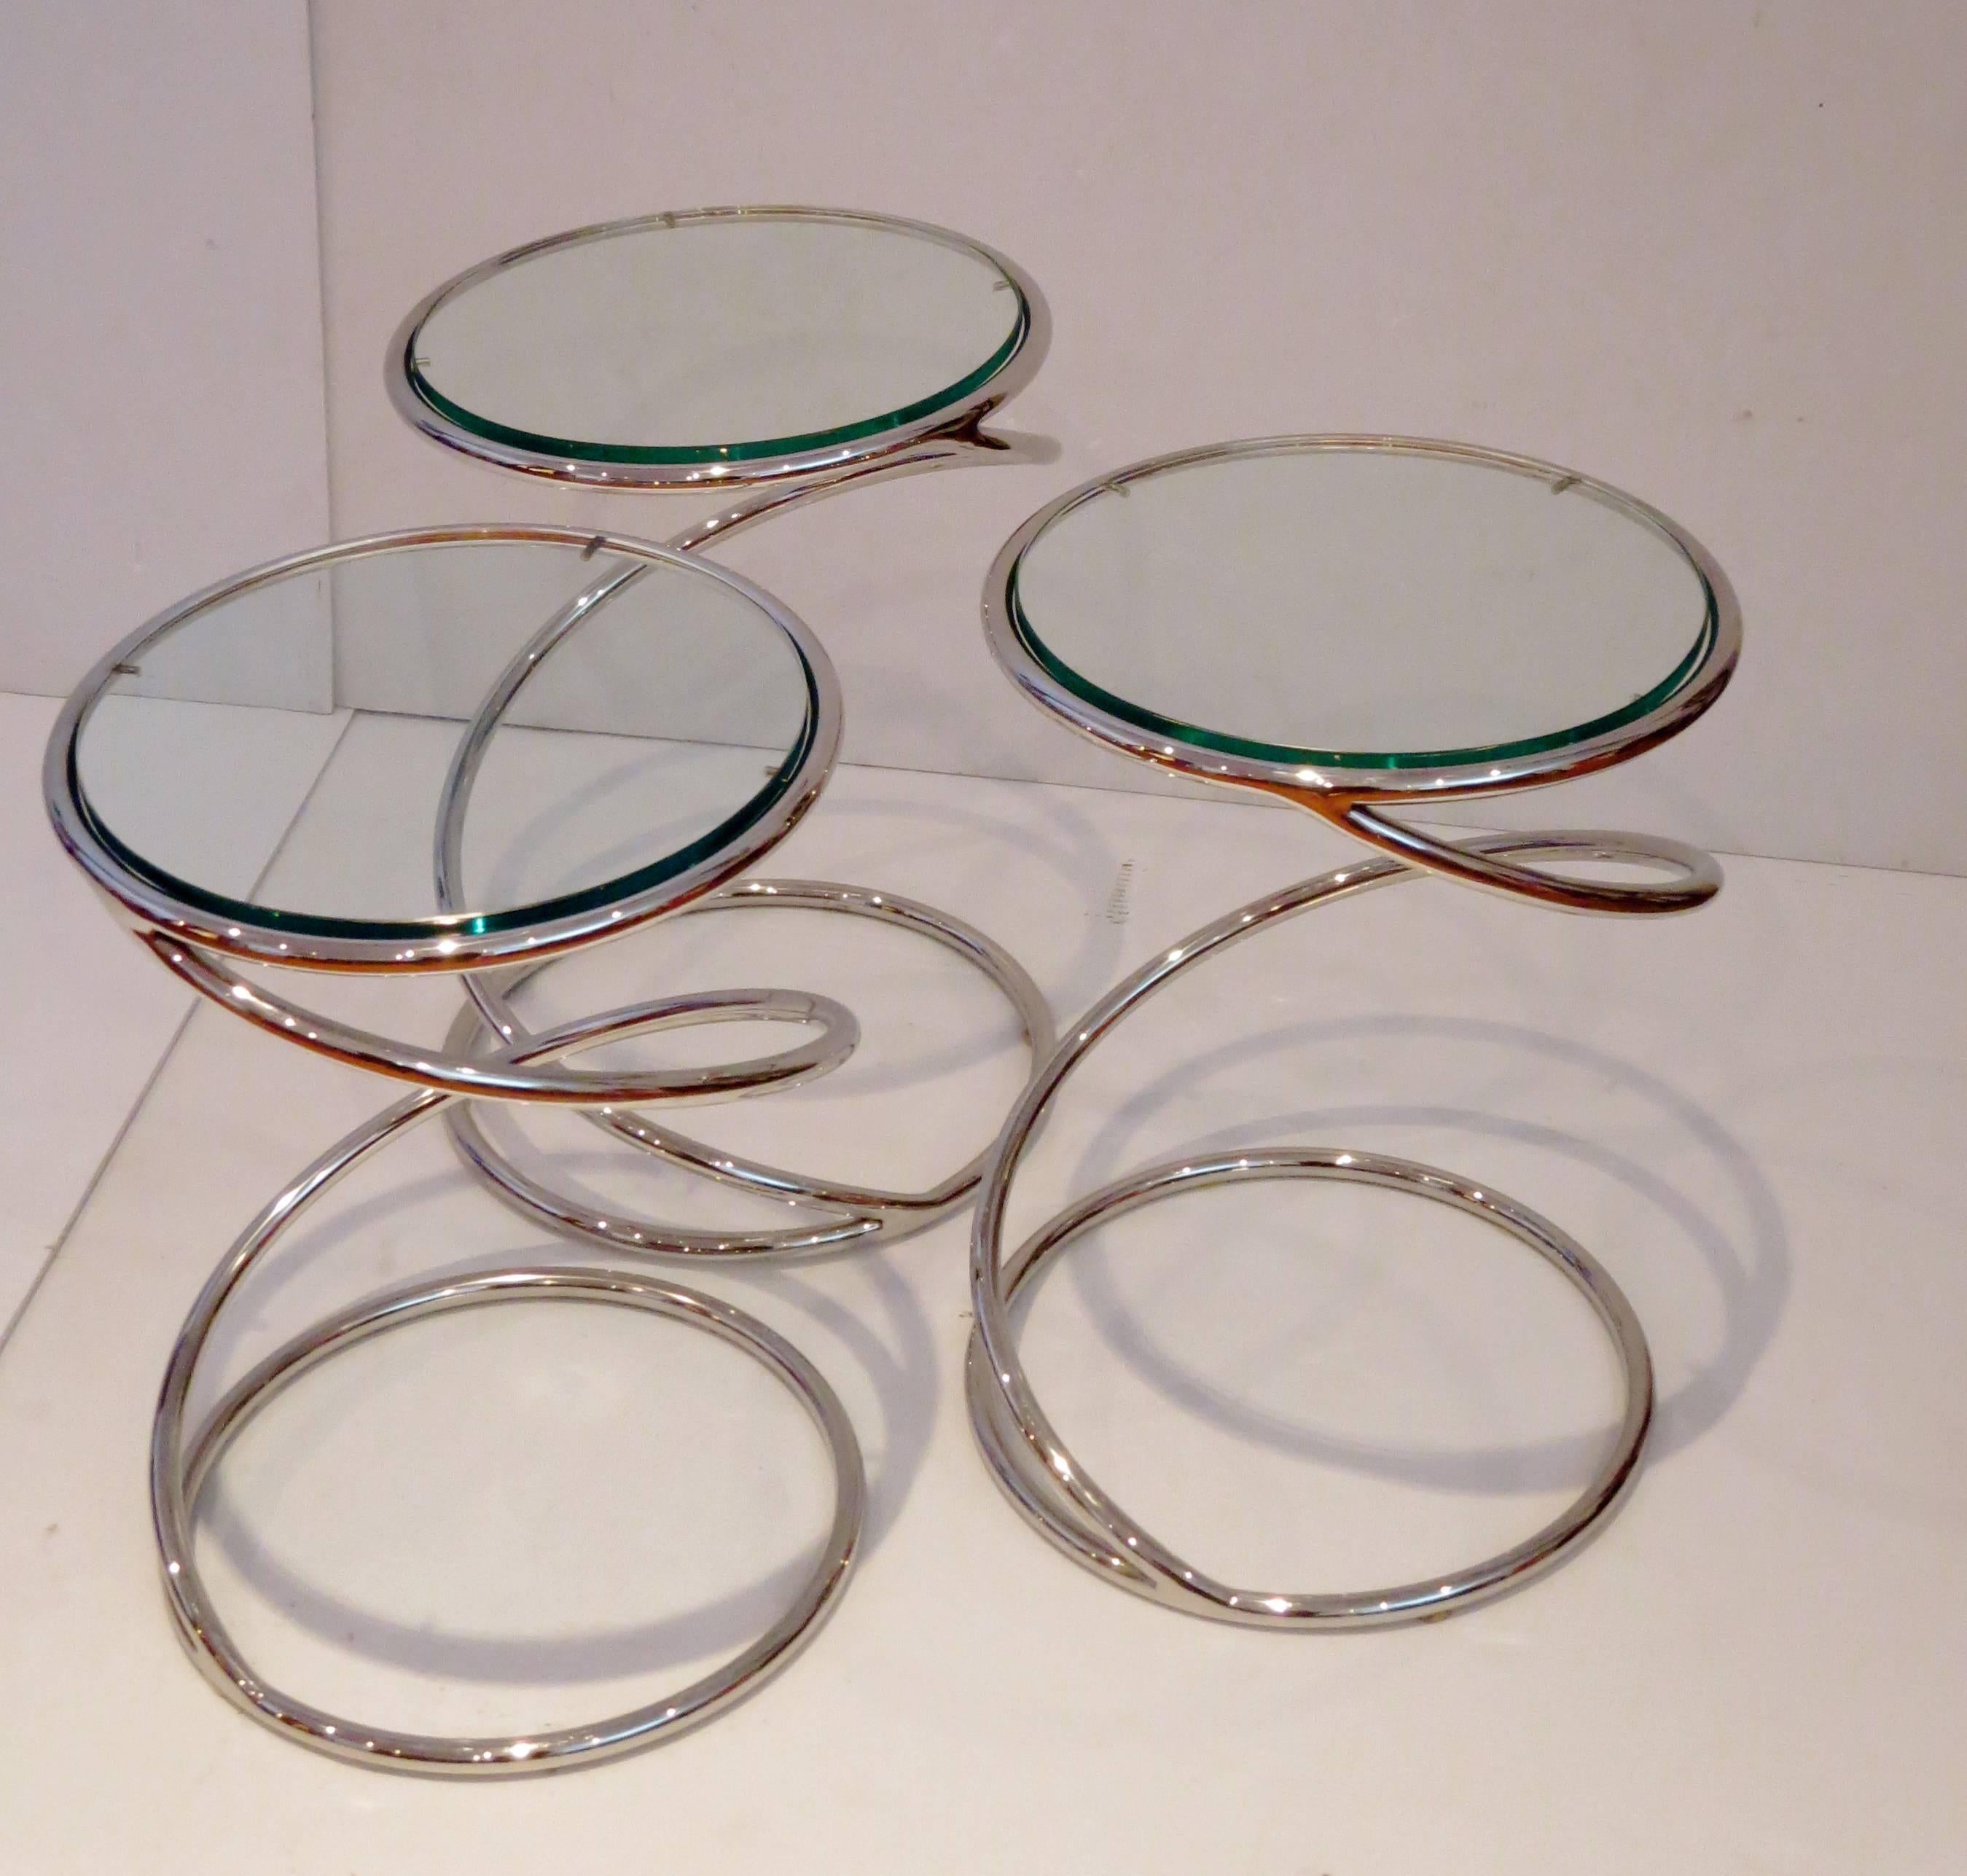 Simple elegant single cocktail tables designed by Leon Rosen for Pace furniture, in polished chrome and glass, great condition buyer has the choice to buy 1,2, or 3.